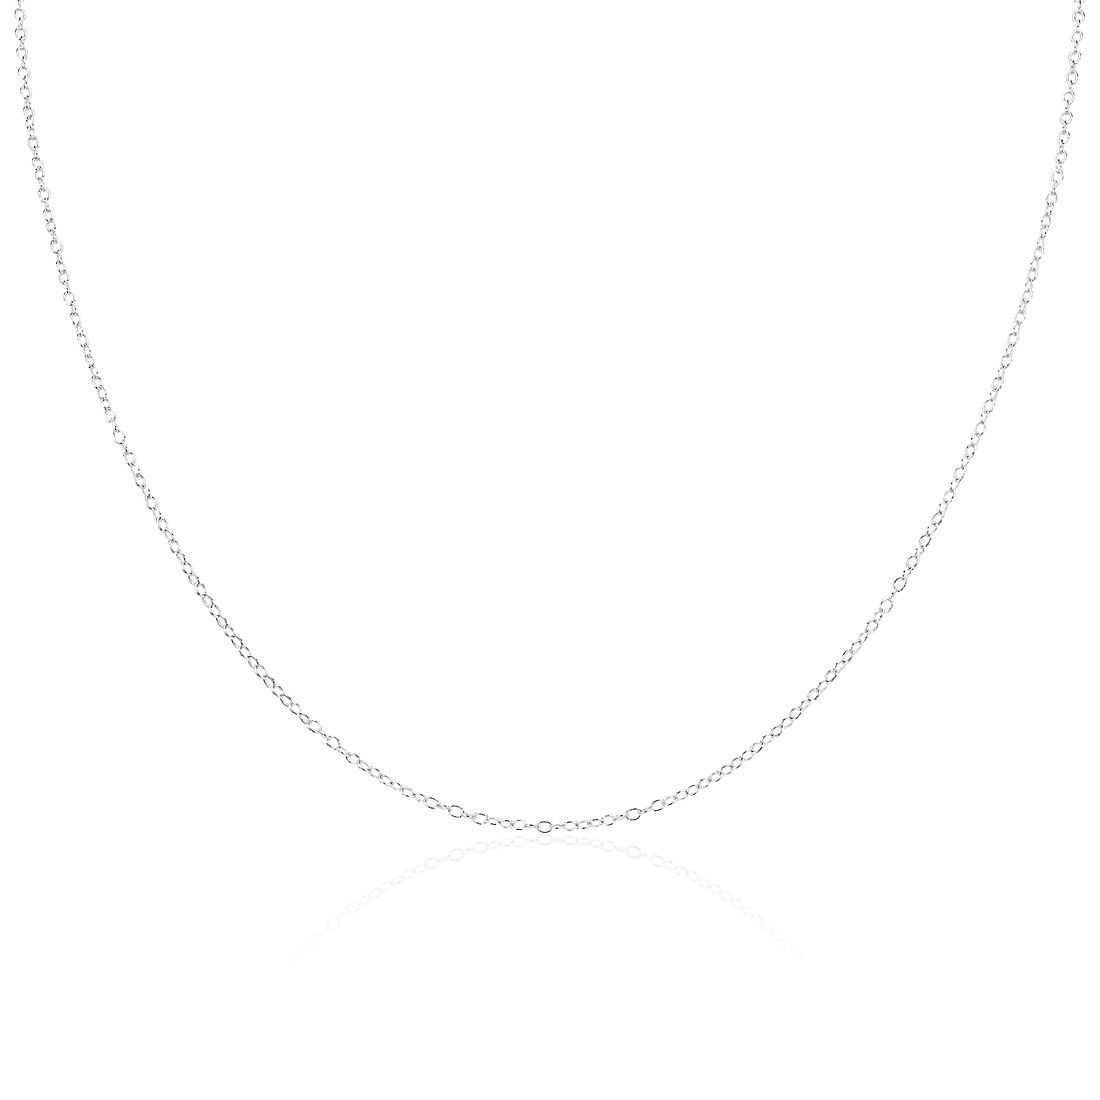 Cable Chain in Sterling Silver (1.35 mm)